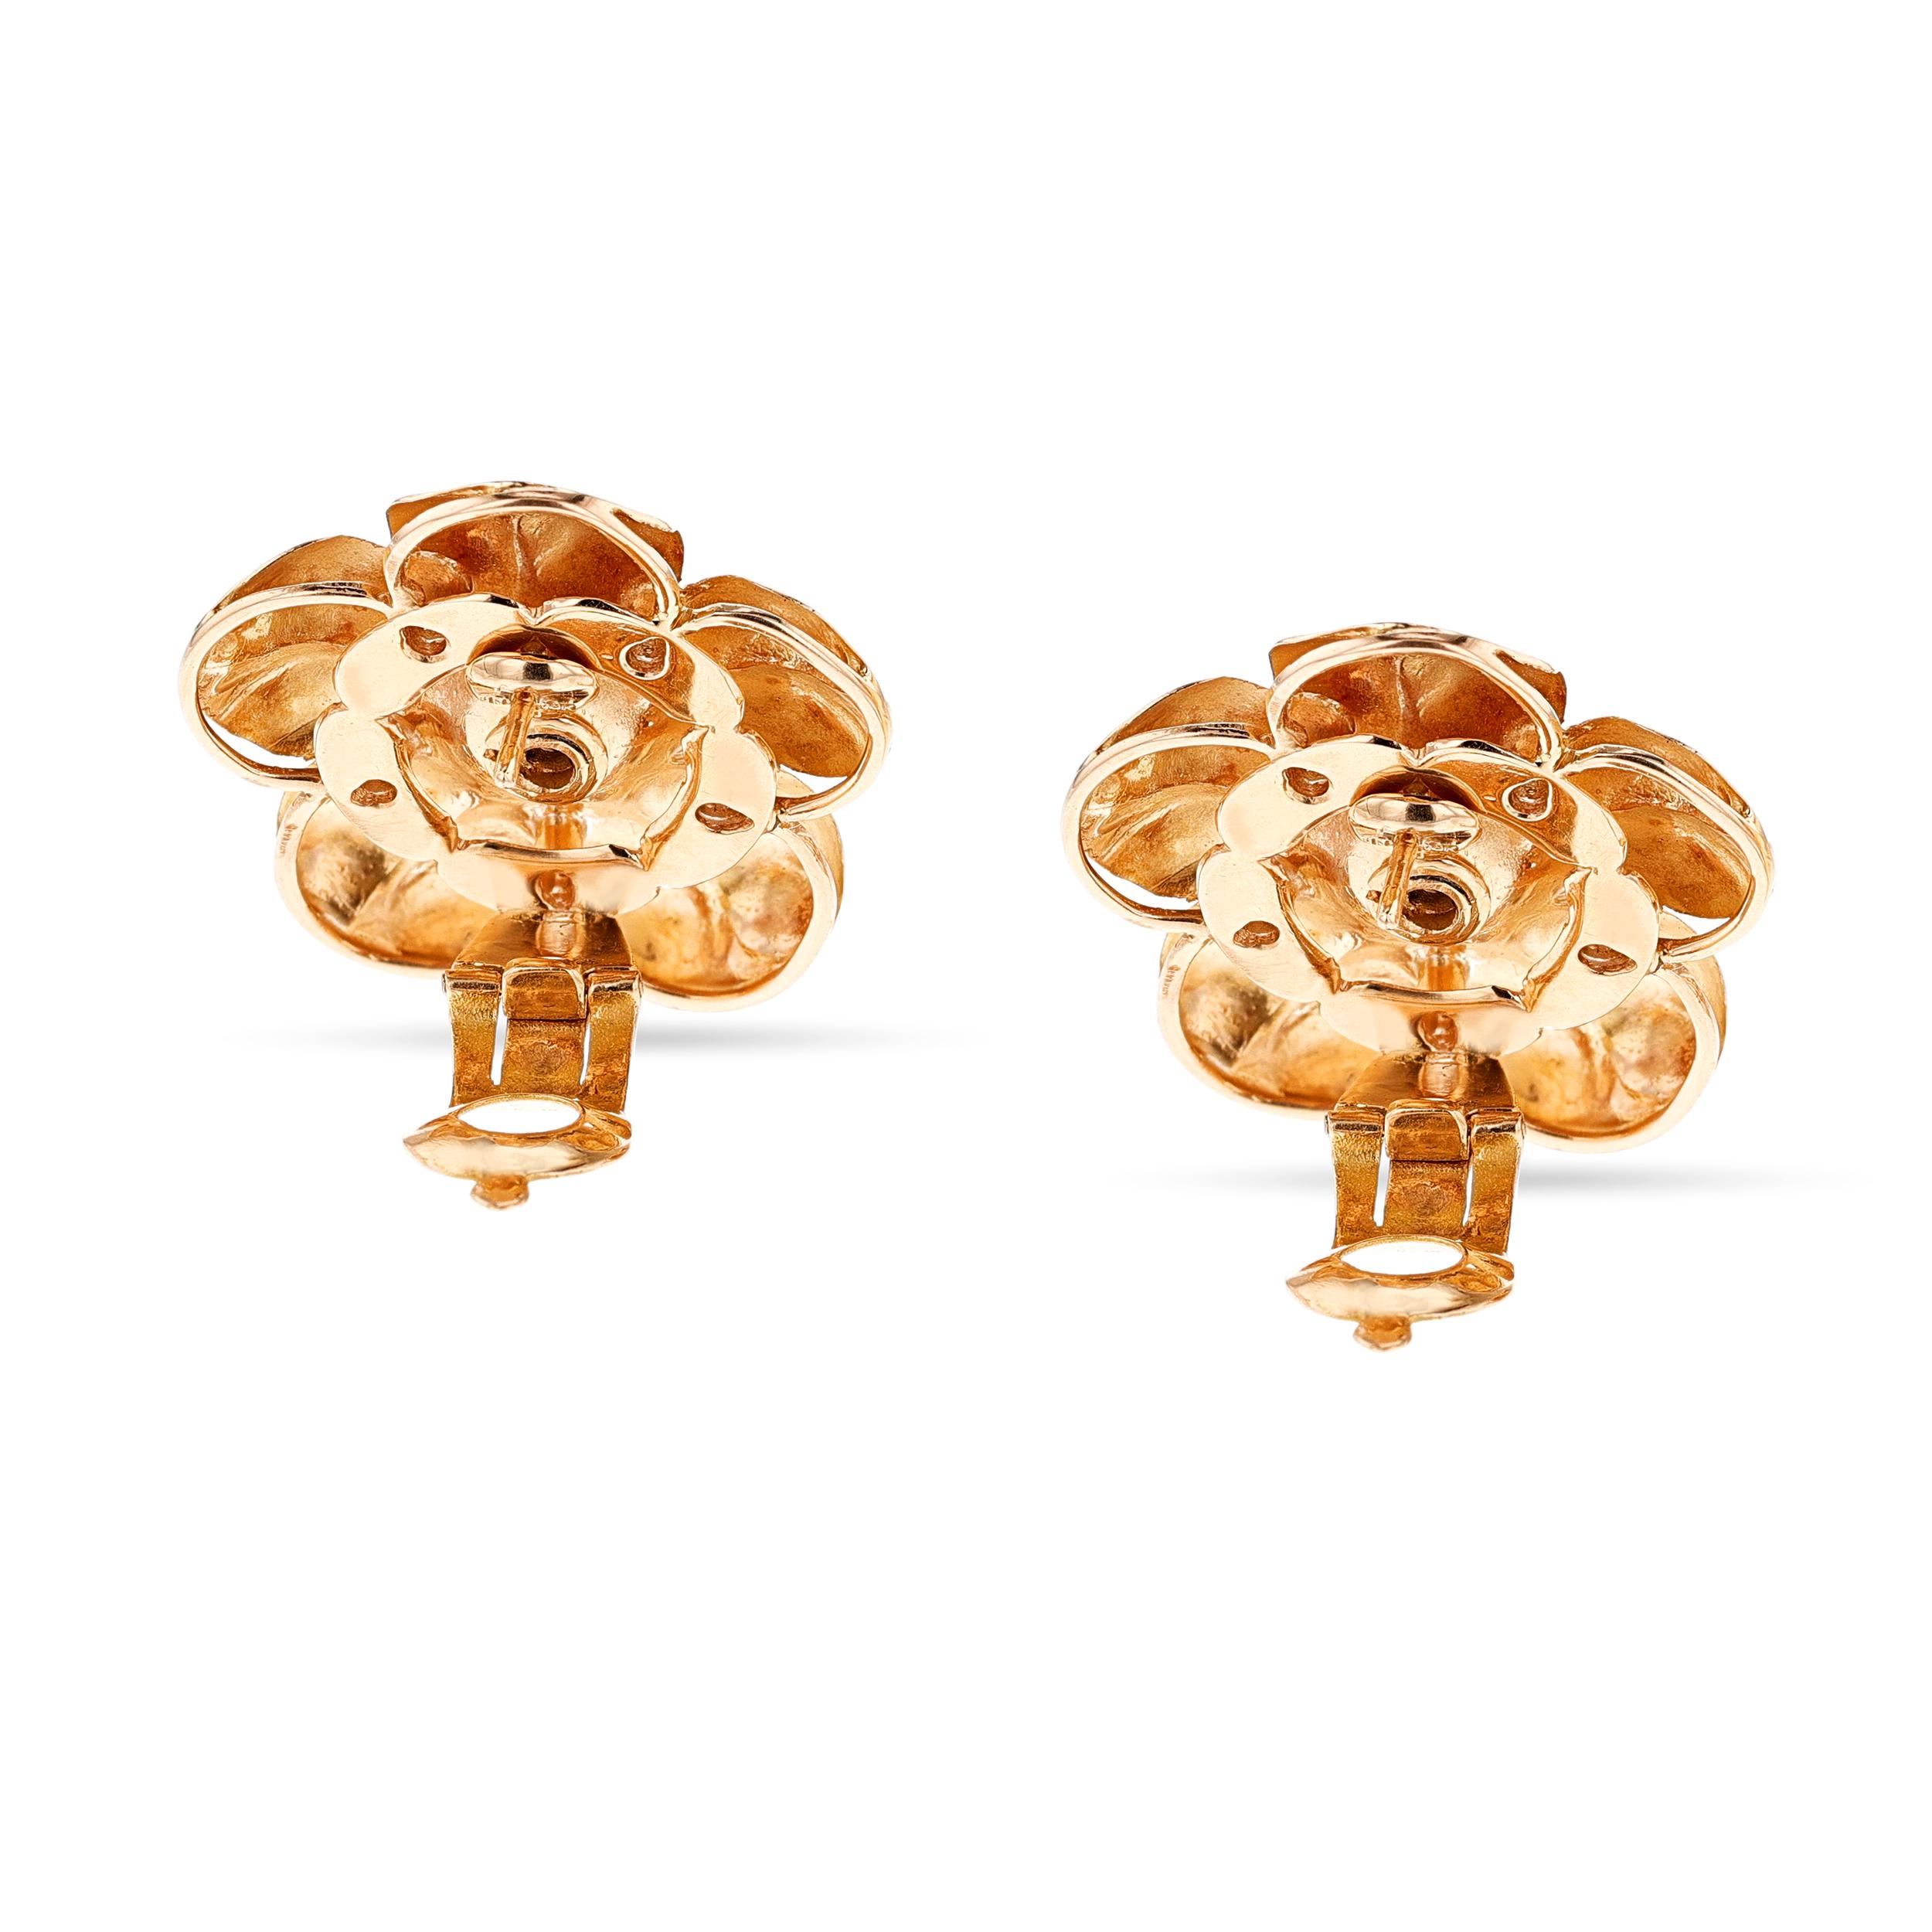 Pery et Fils Van Cleef & Arpels Floral Earrings with Gold and Diamonds, 18k In Excellent Condition For Sale In New York, NY